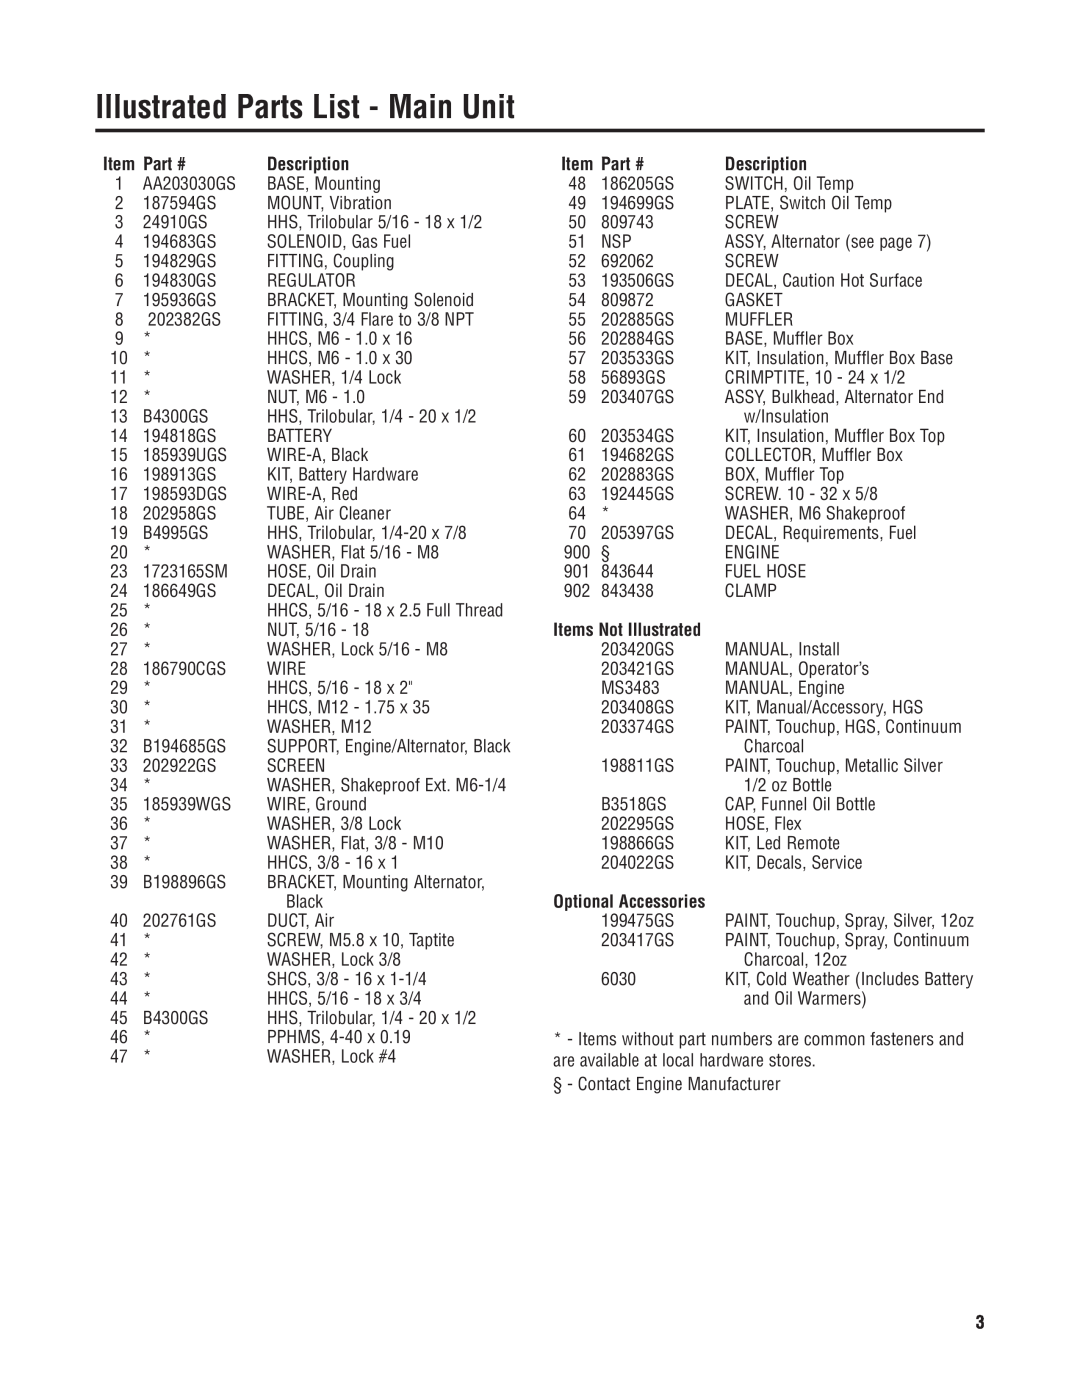 Briggs & Stratton 40277 manual Illustrated Parts List - Main Unit, Description, Items Not Illustrated, Part # 